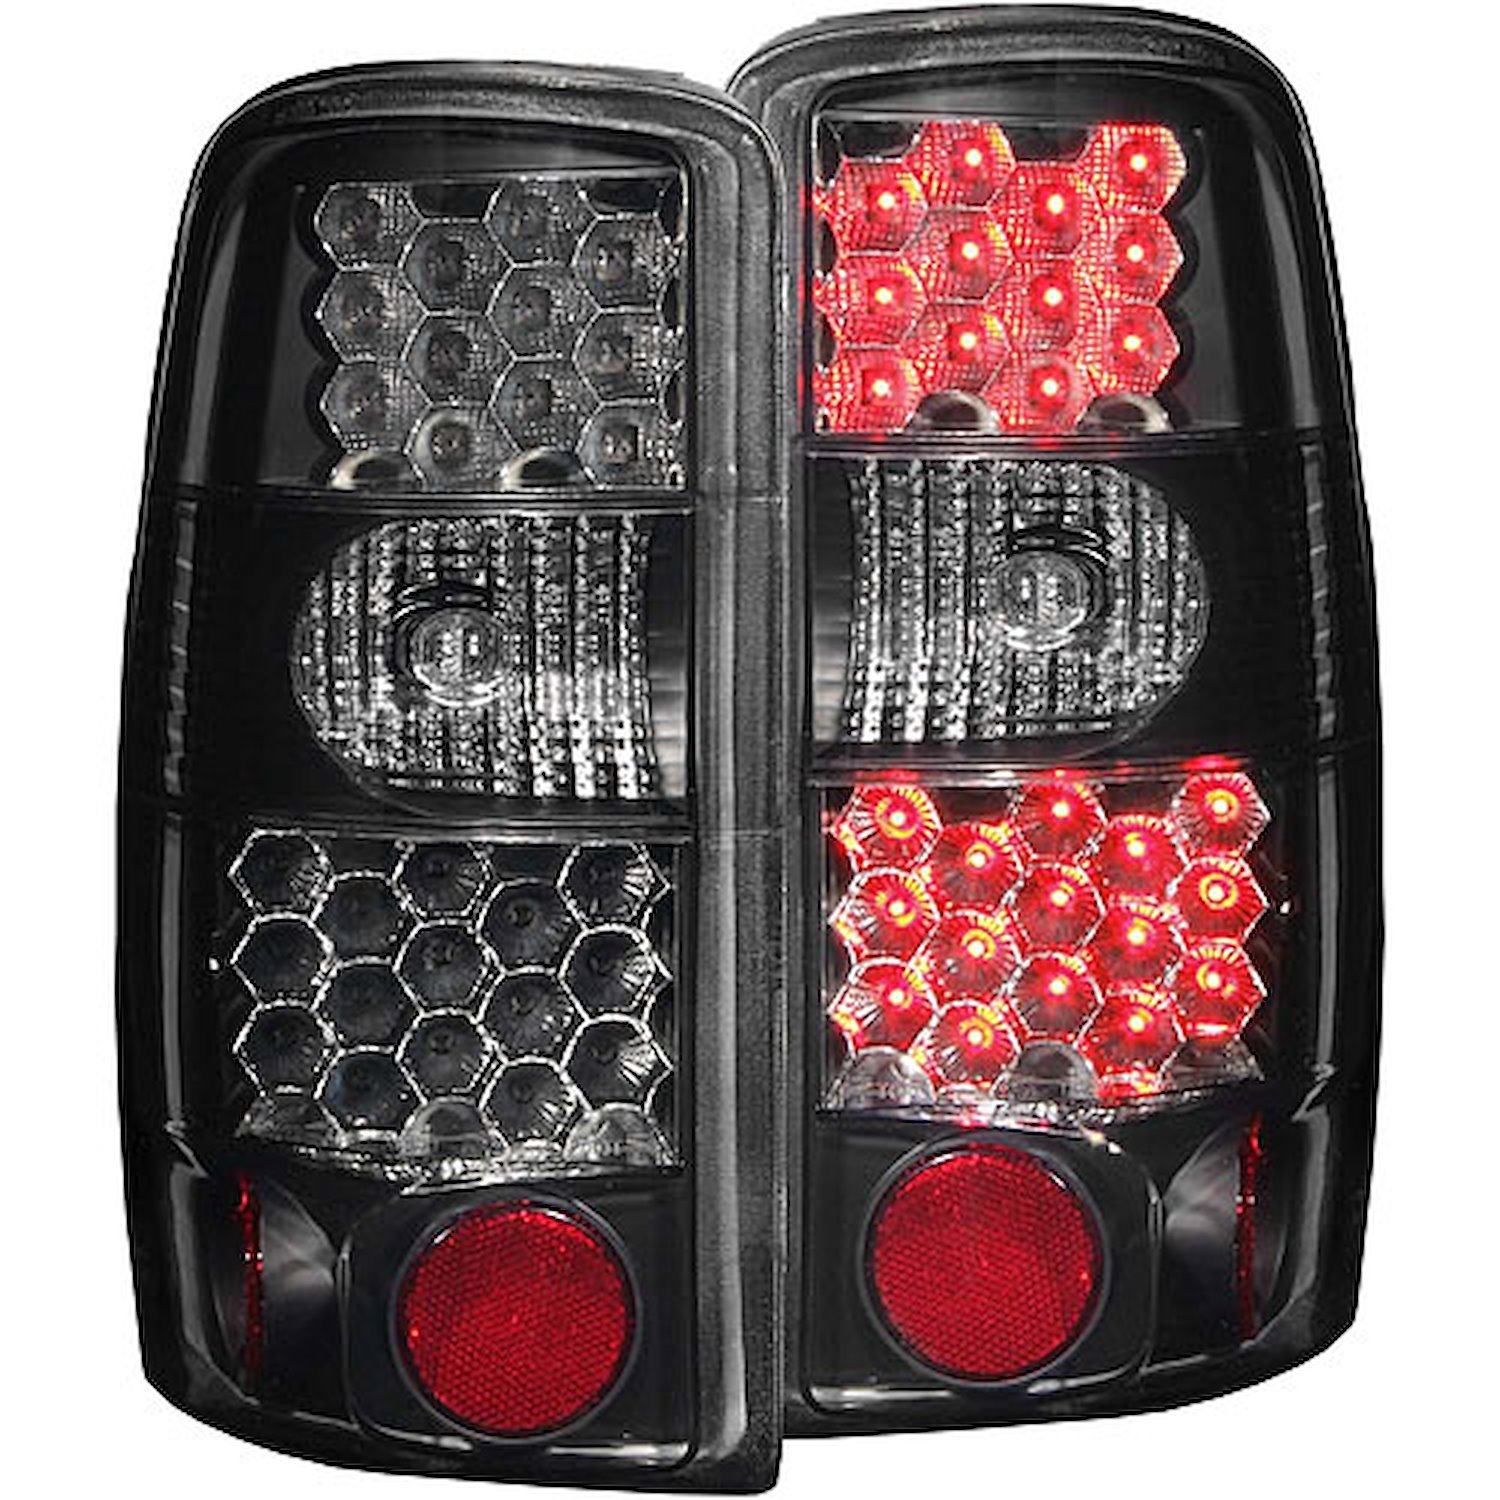 2000-2006 Chevy Suburban/Tahoe LED Taillights